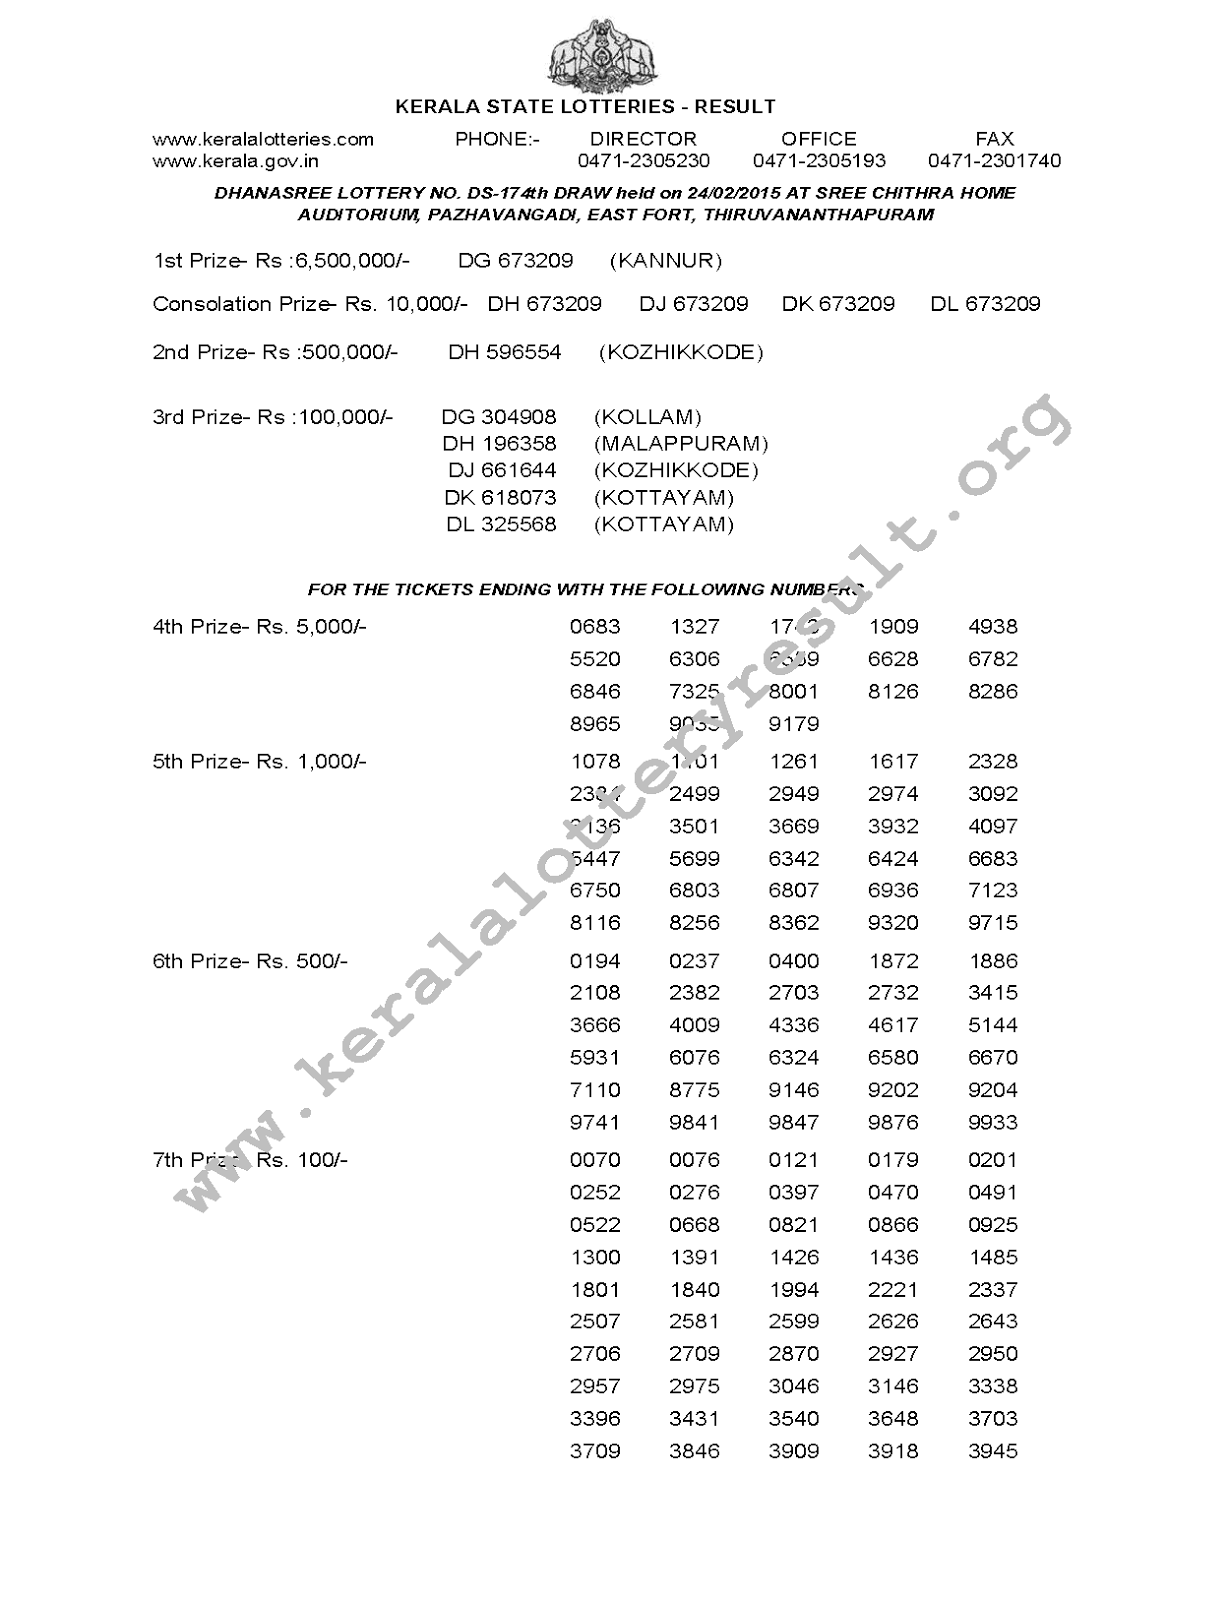 DHANASREE Lottery DS 174 Result 24-2-2015